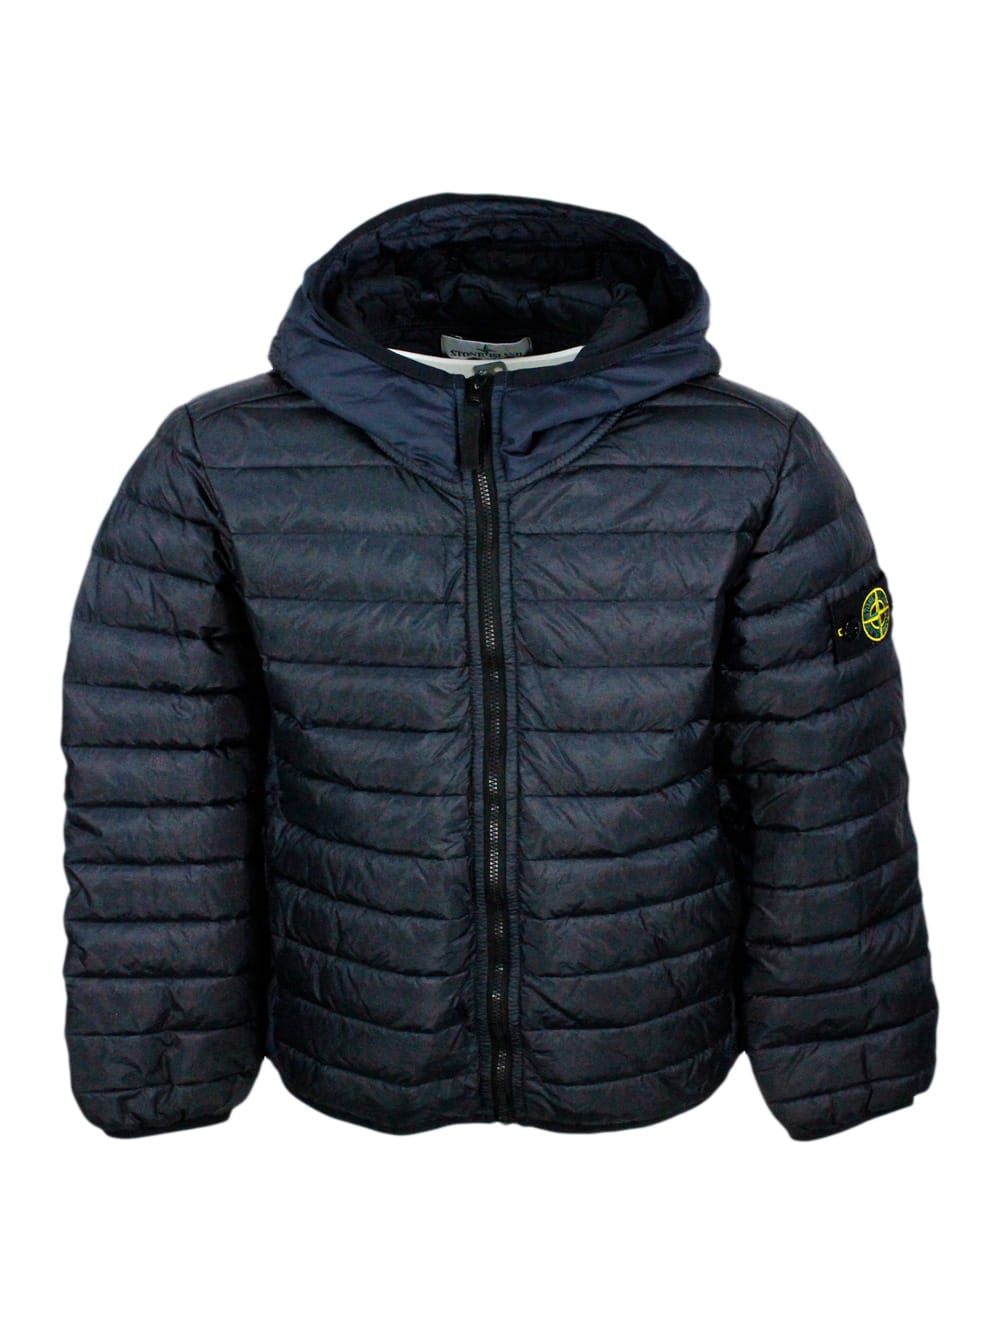 Stone Island Kids' 100 Gram Padded Down Jacket Made Of Recycled Crunchy Nylon. Zip Closure, Hood And Logo On The Sleeve In Blu